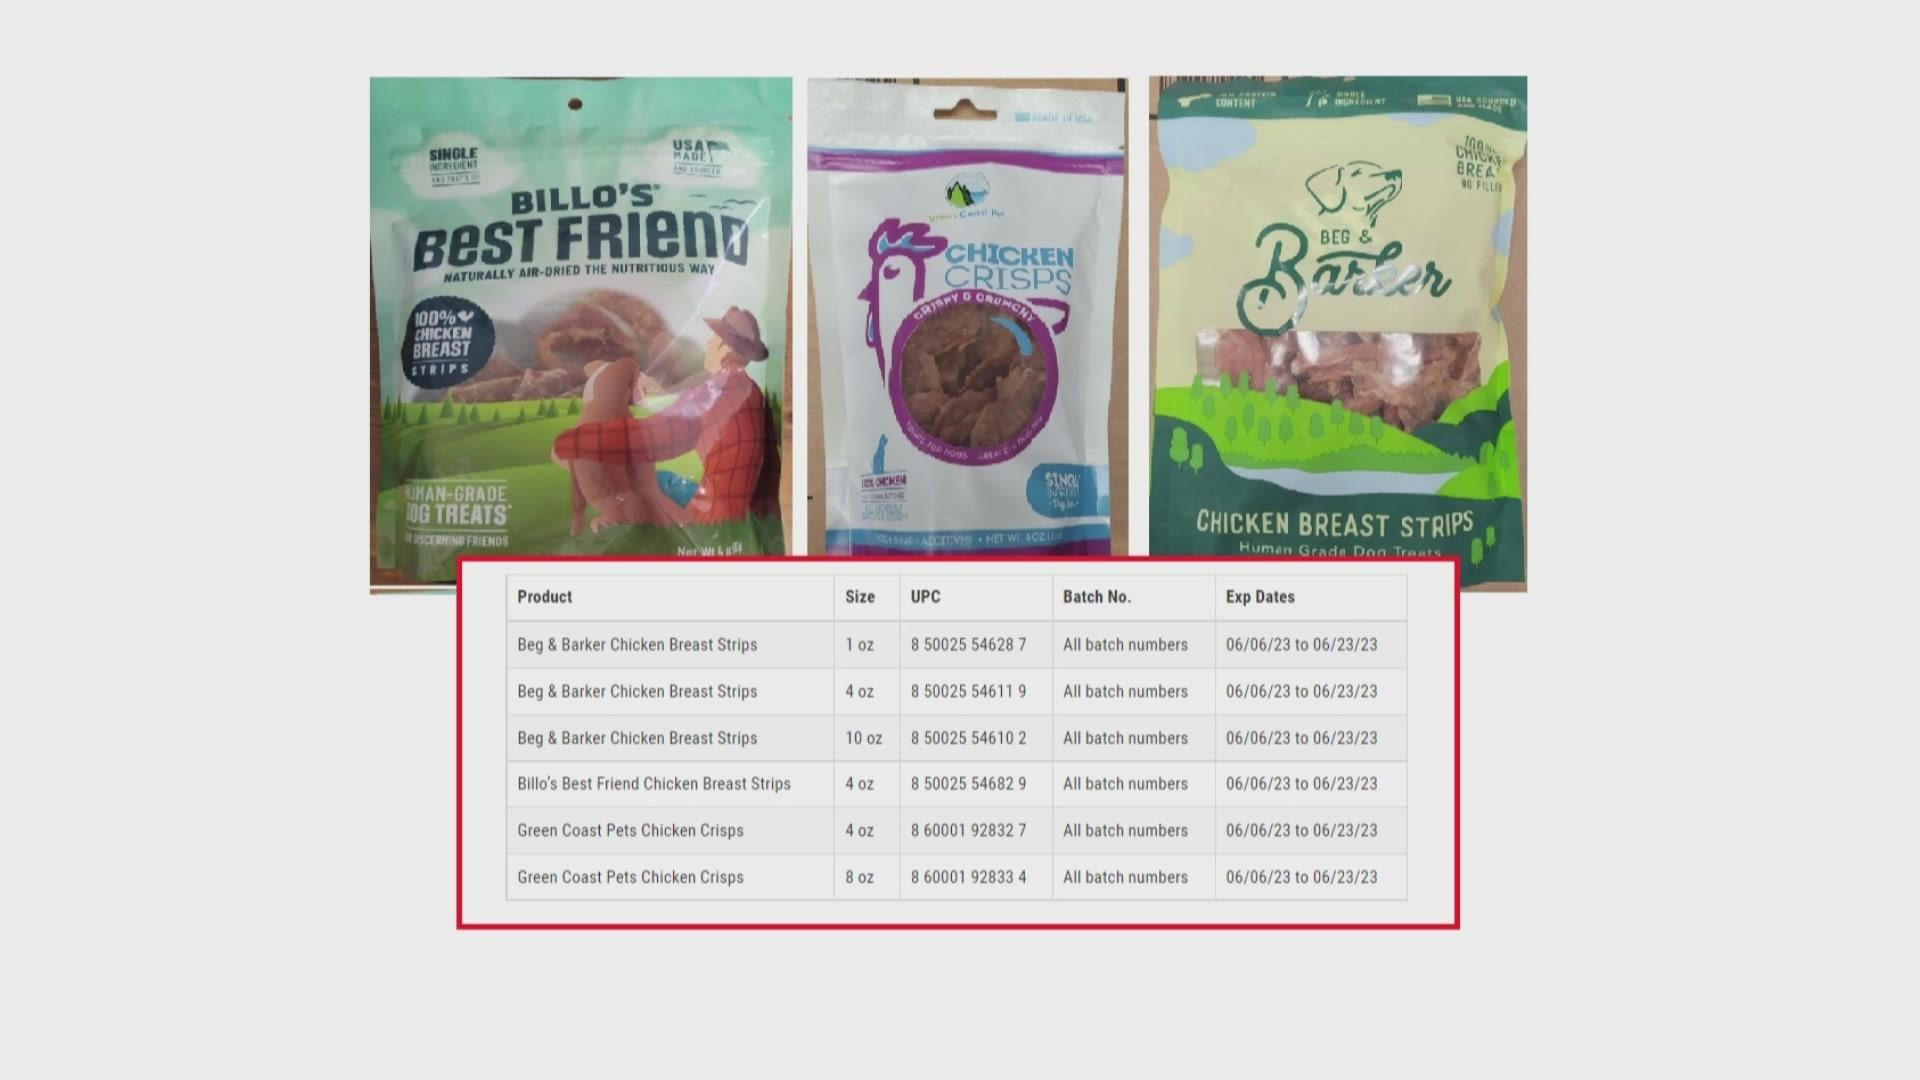 The North Carolina Department of Agriculture found salmonella in dog treat samples.